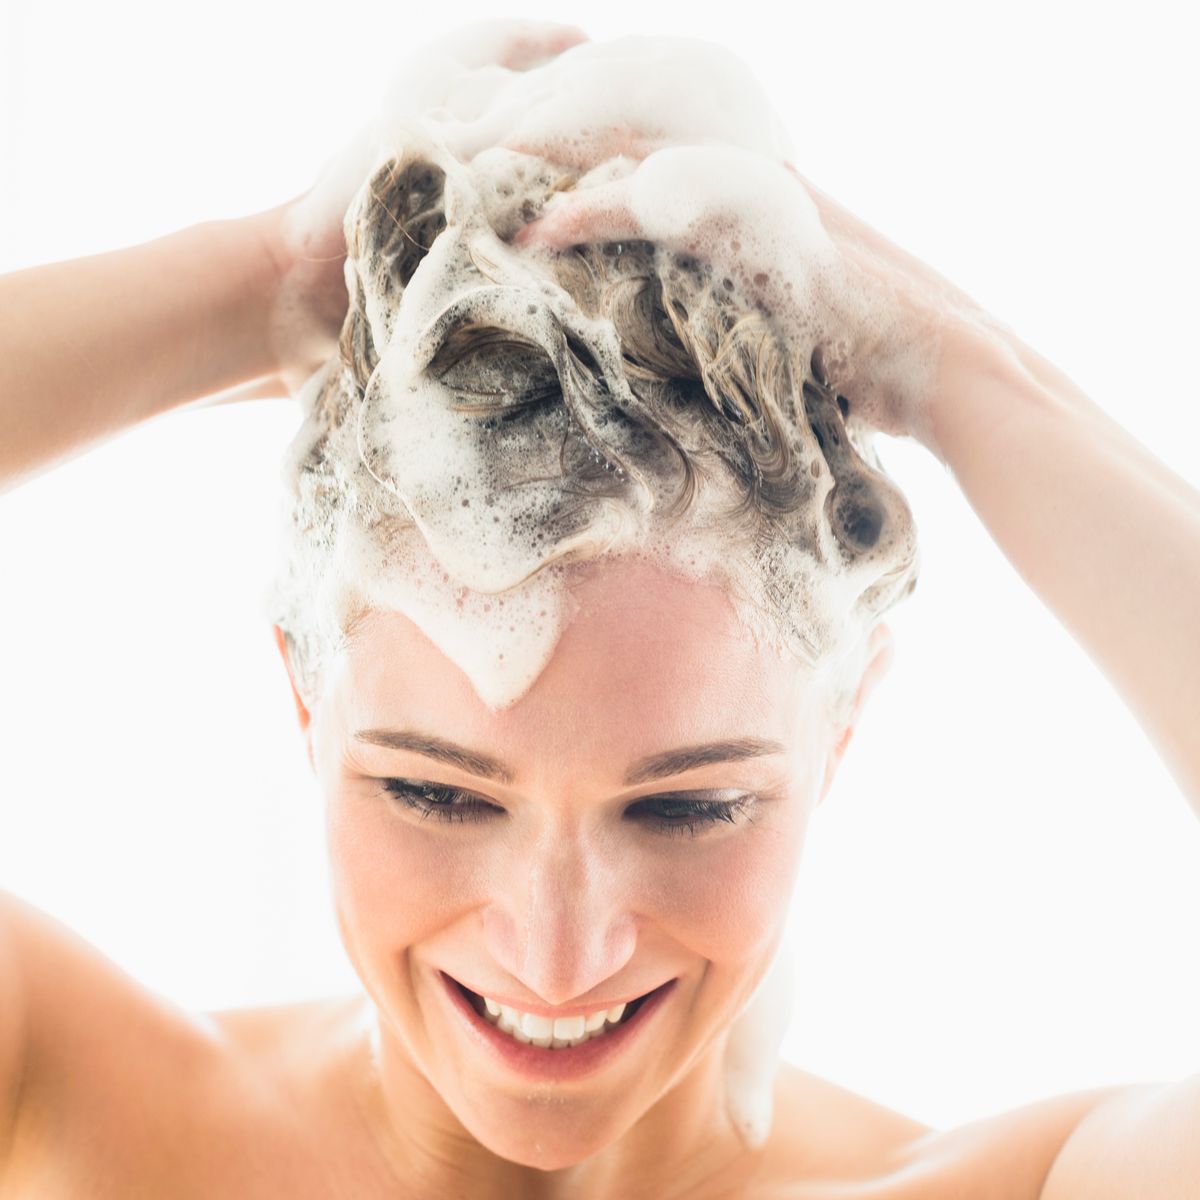 Use a shampoo that nourishes your hair.